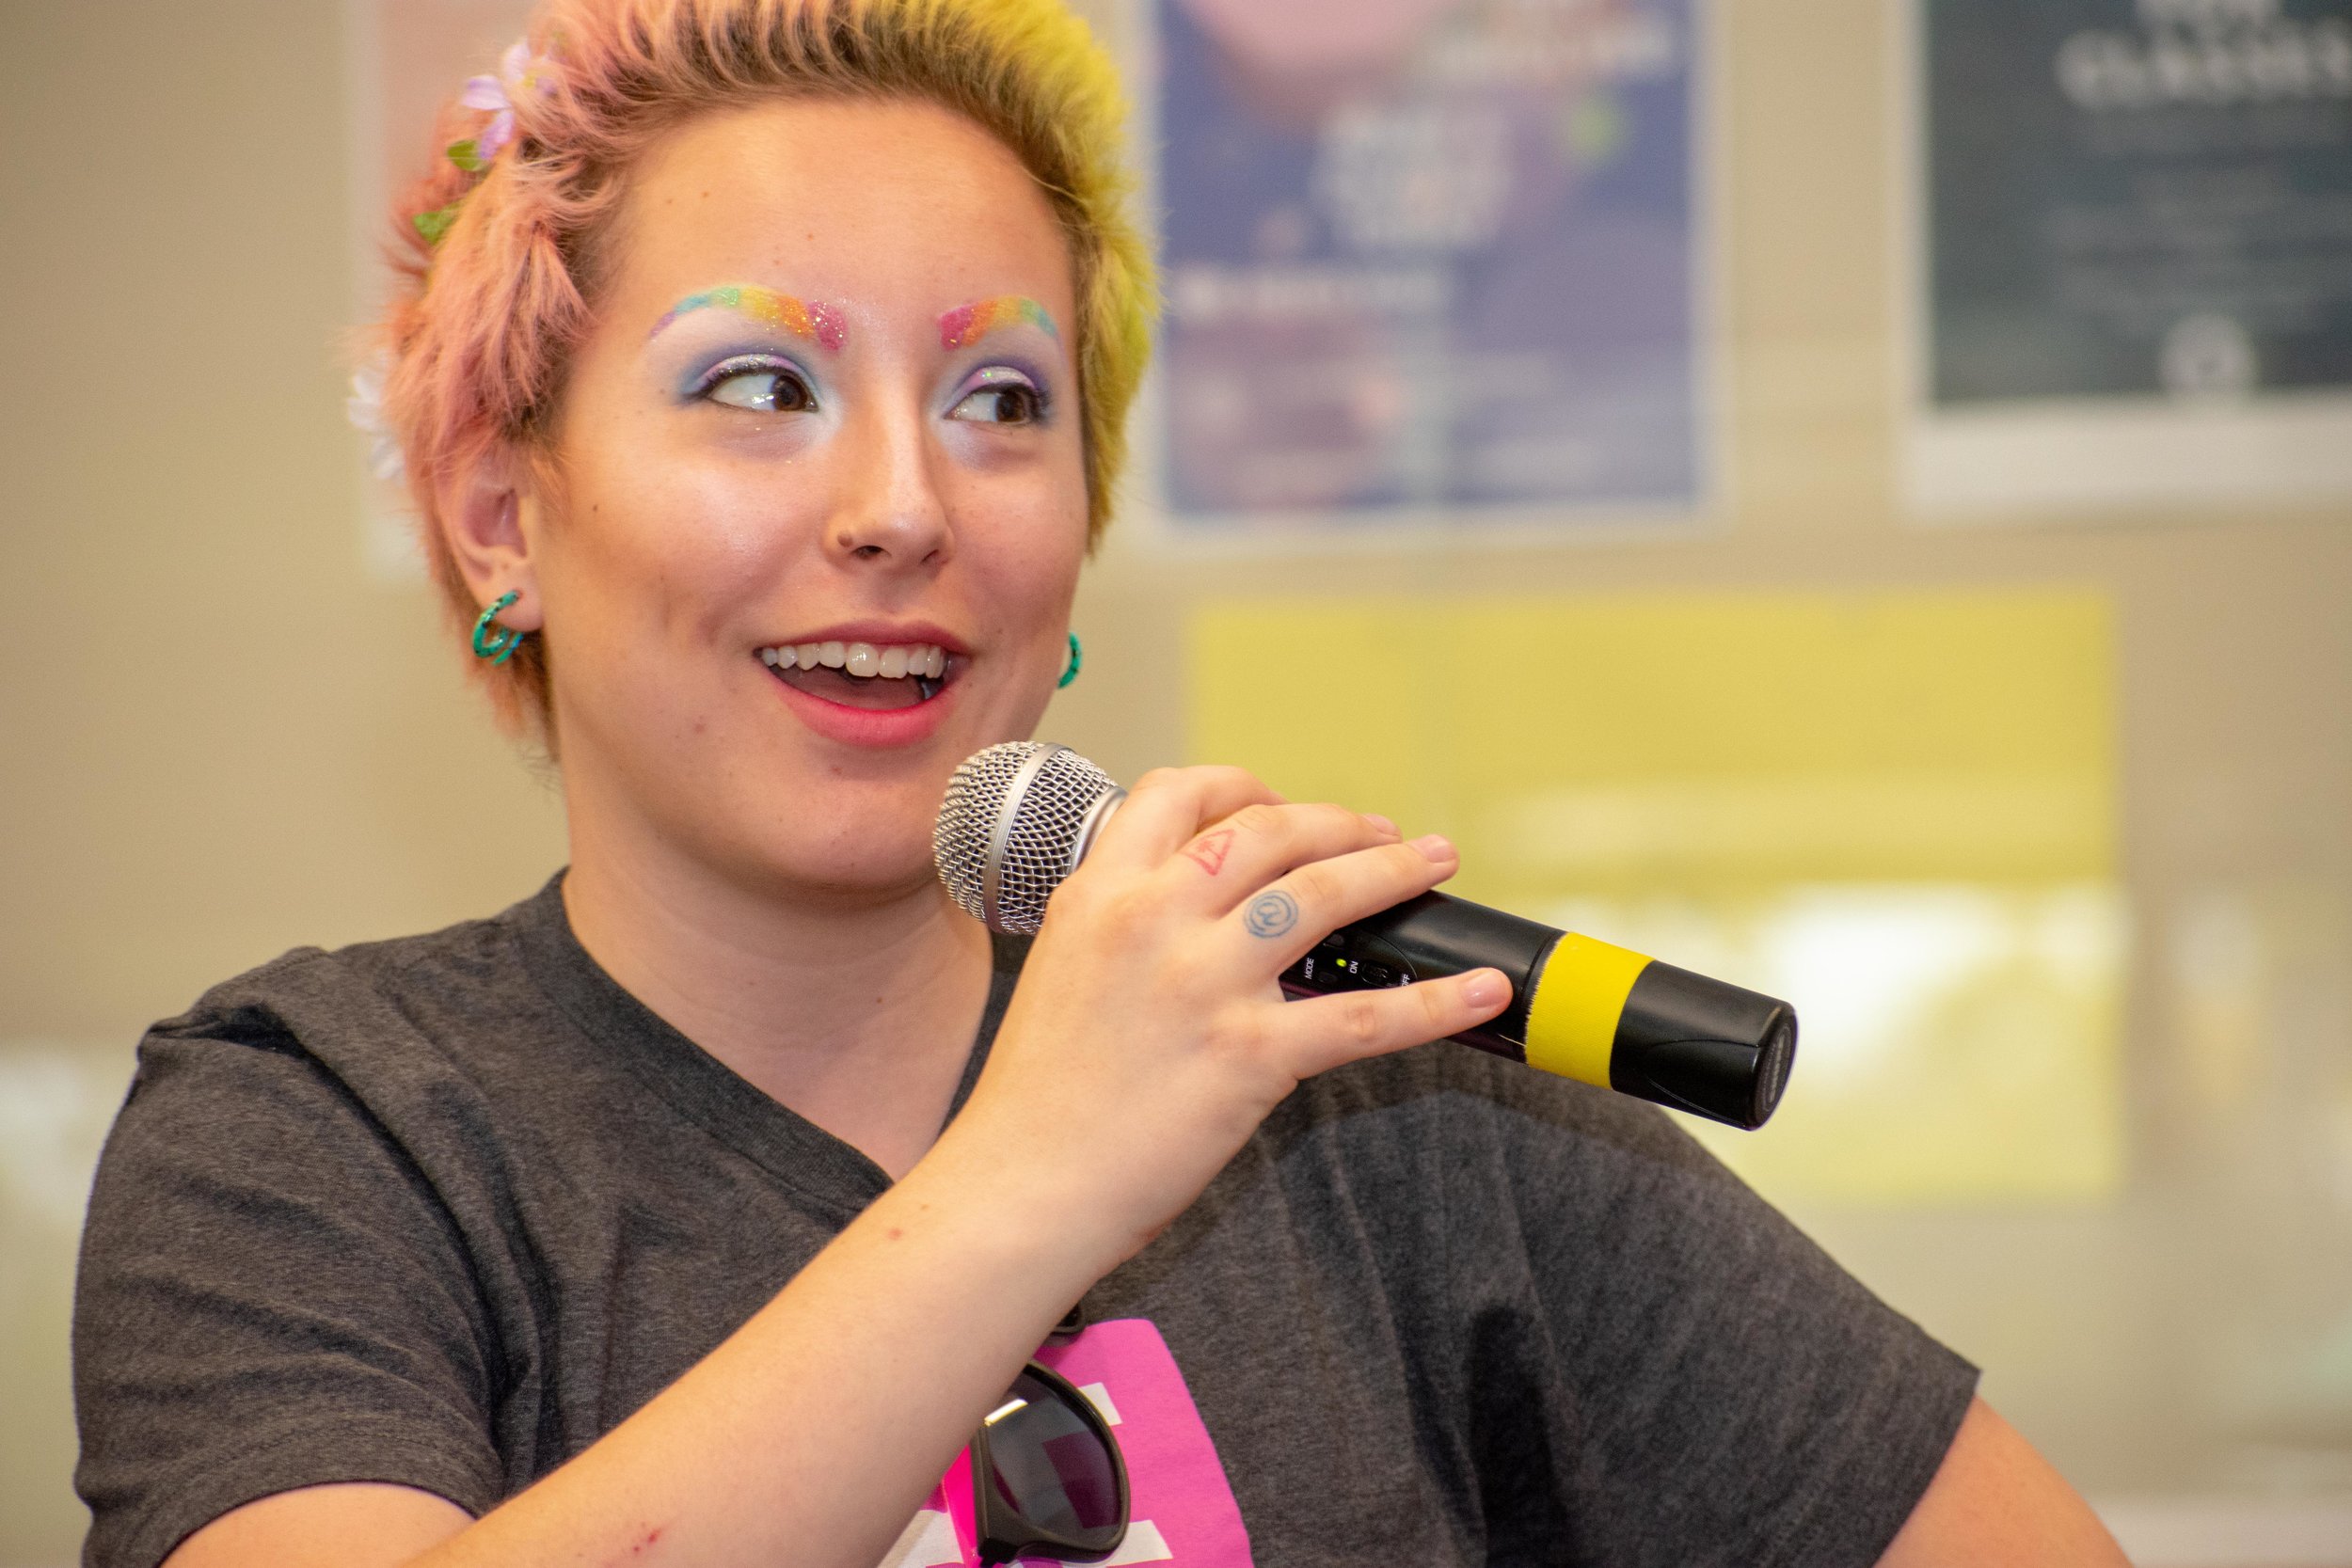  Mysterie Peña, the president of the Gender Sexuality Alliance at Santa Monica College addresses the speakers at a panel discussion on the LGBTQ+ community in academia during the school’s Pride Week on Wednesday, May 16 in Santa Monica, California. T